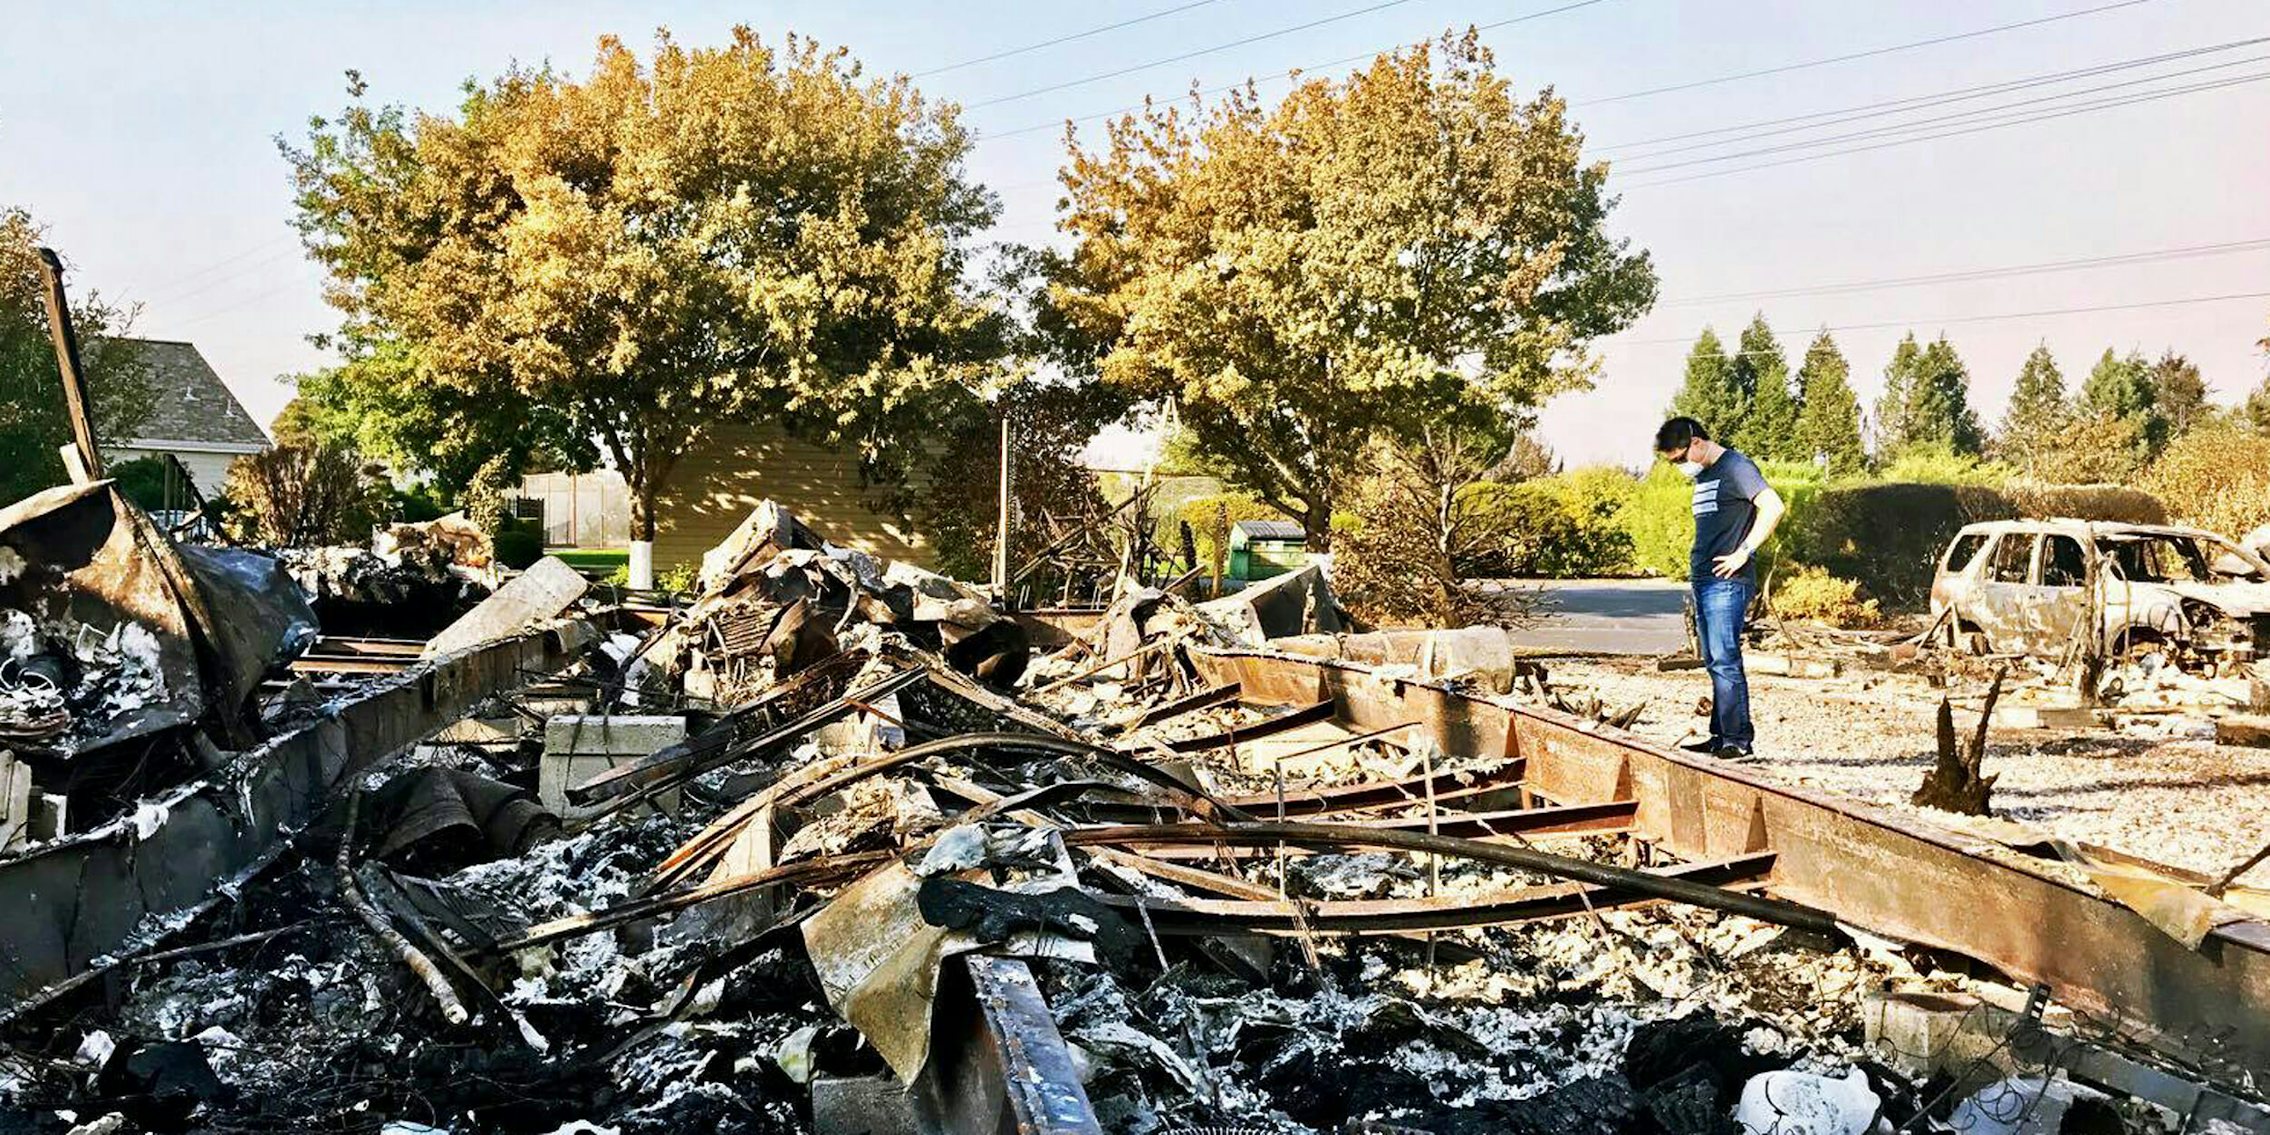 Kevin Kwan Loucks looks at the devastation wrought to his family's home as a result of the wildfires in California.